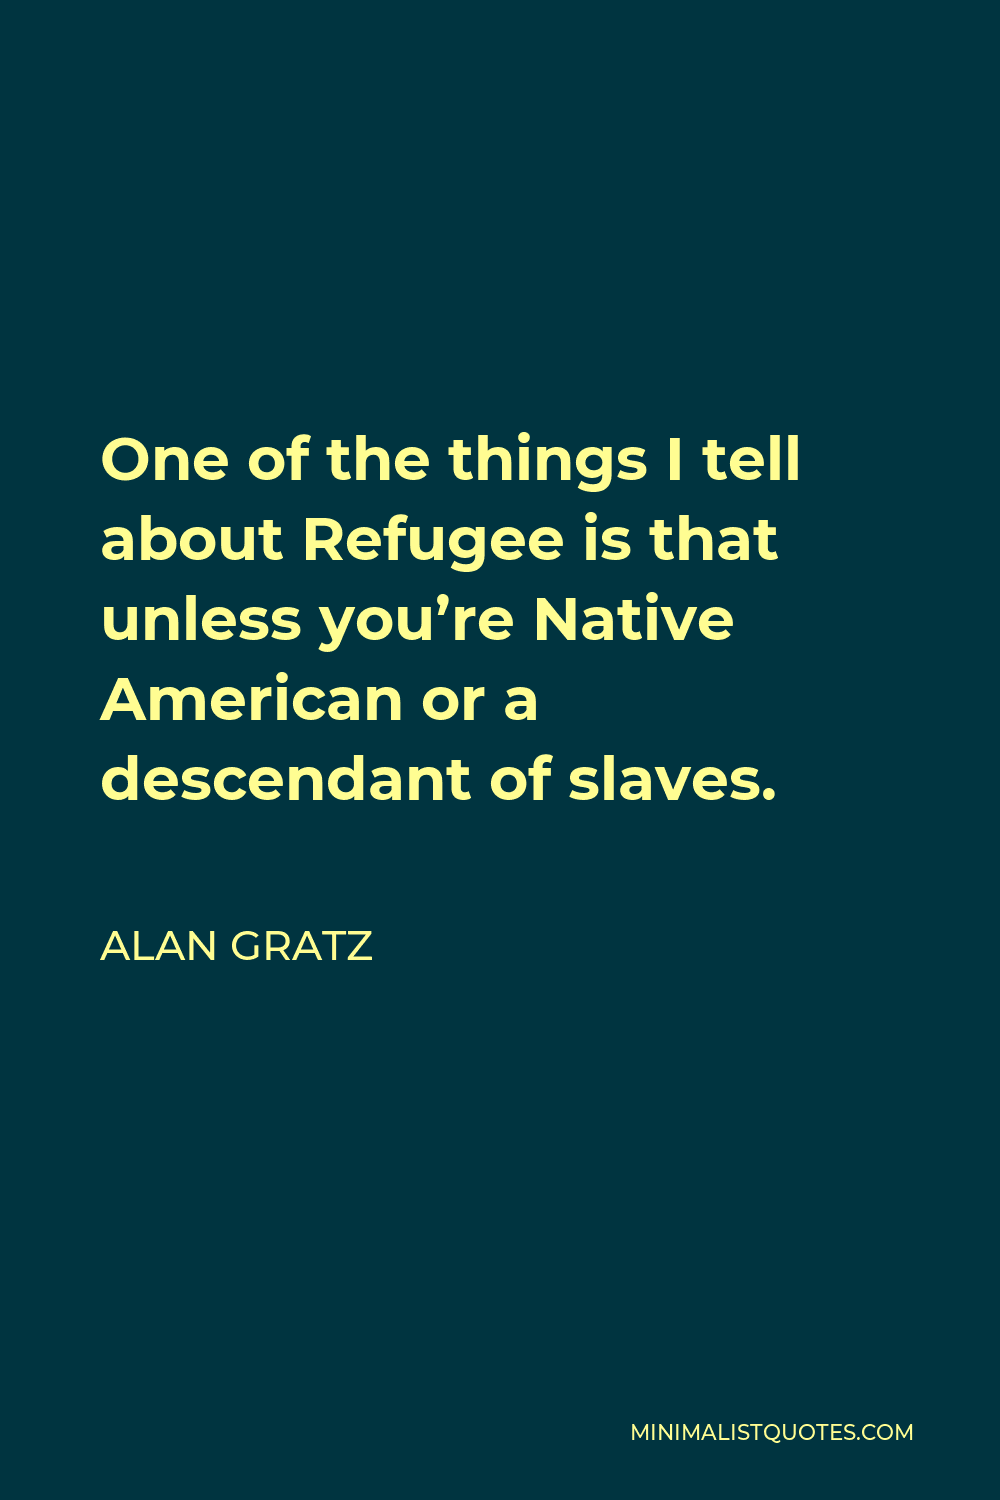 Alan Gratz Quote - One of the things I tell about Refugee is that unless you’re Native American or a descendant of slaves.